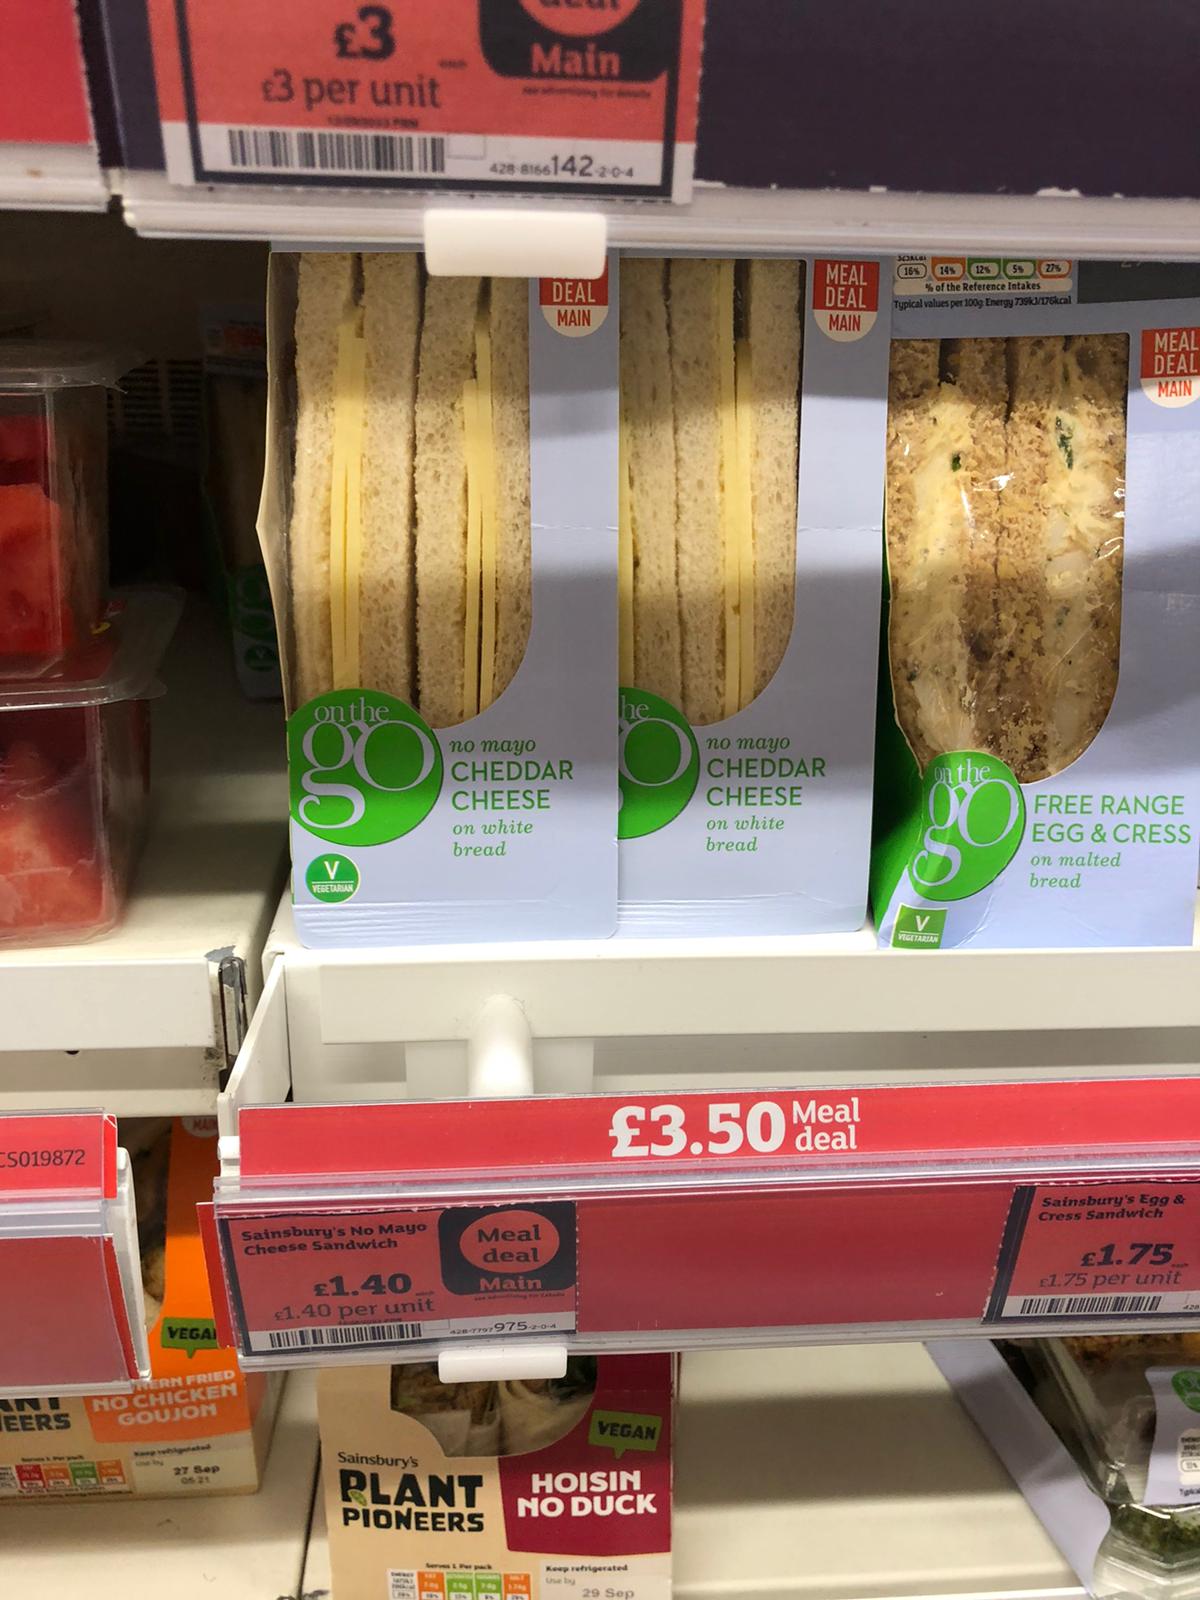 The cheapest cheese sandwich in the area costs £1.40 at Sainsbury’s